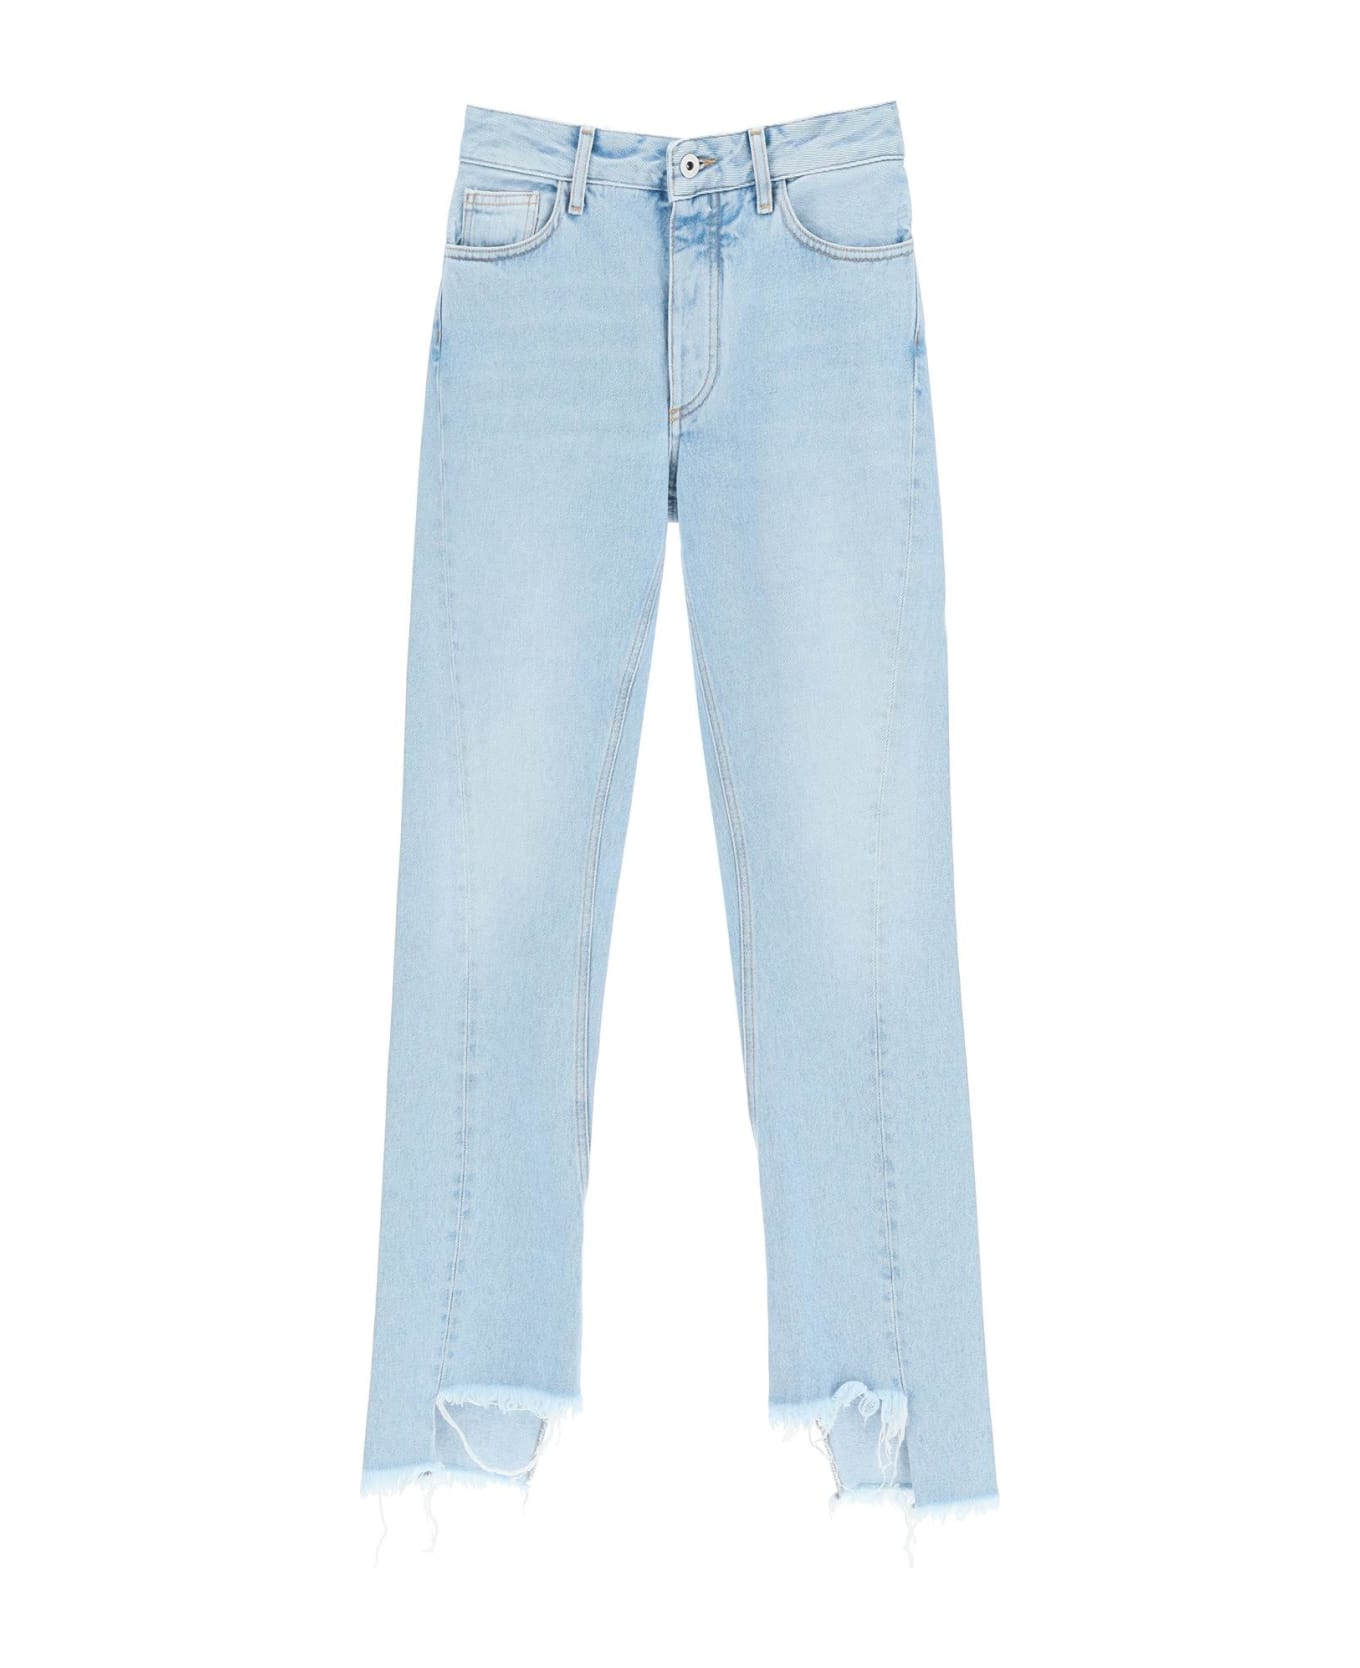 Off-White Slim-fit Jeans With Twisted Seams - Blue デニム